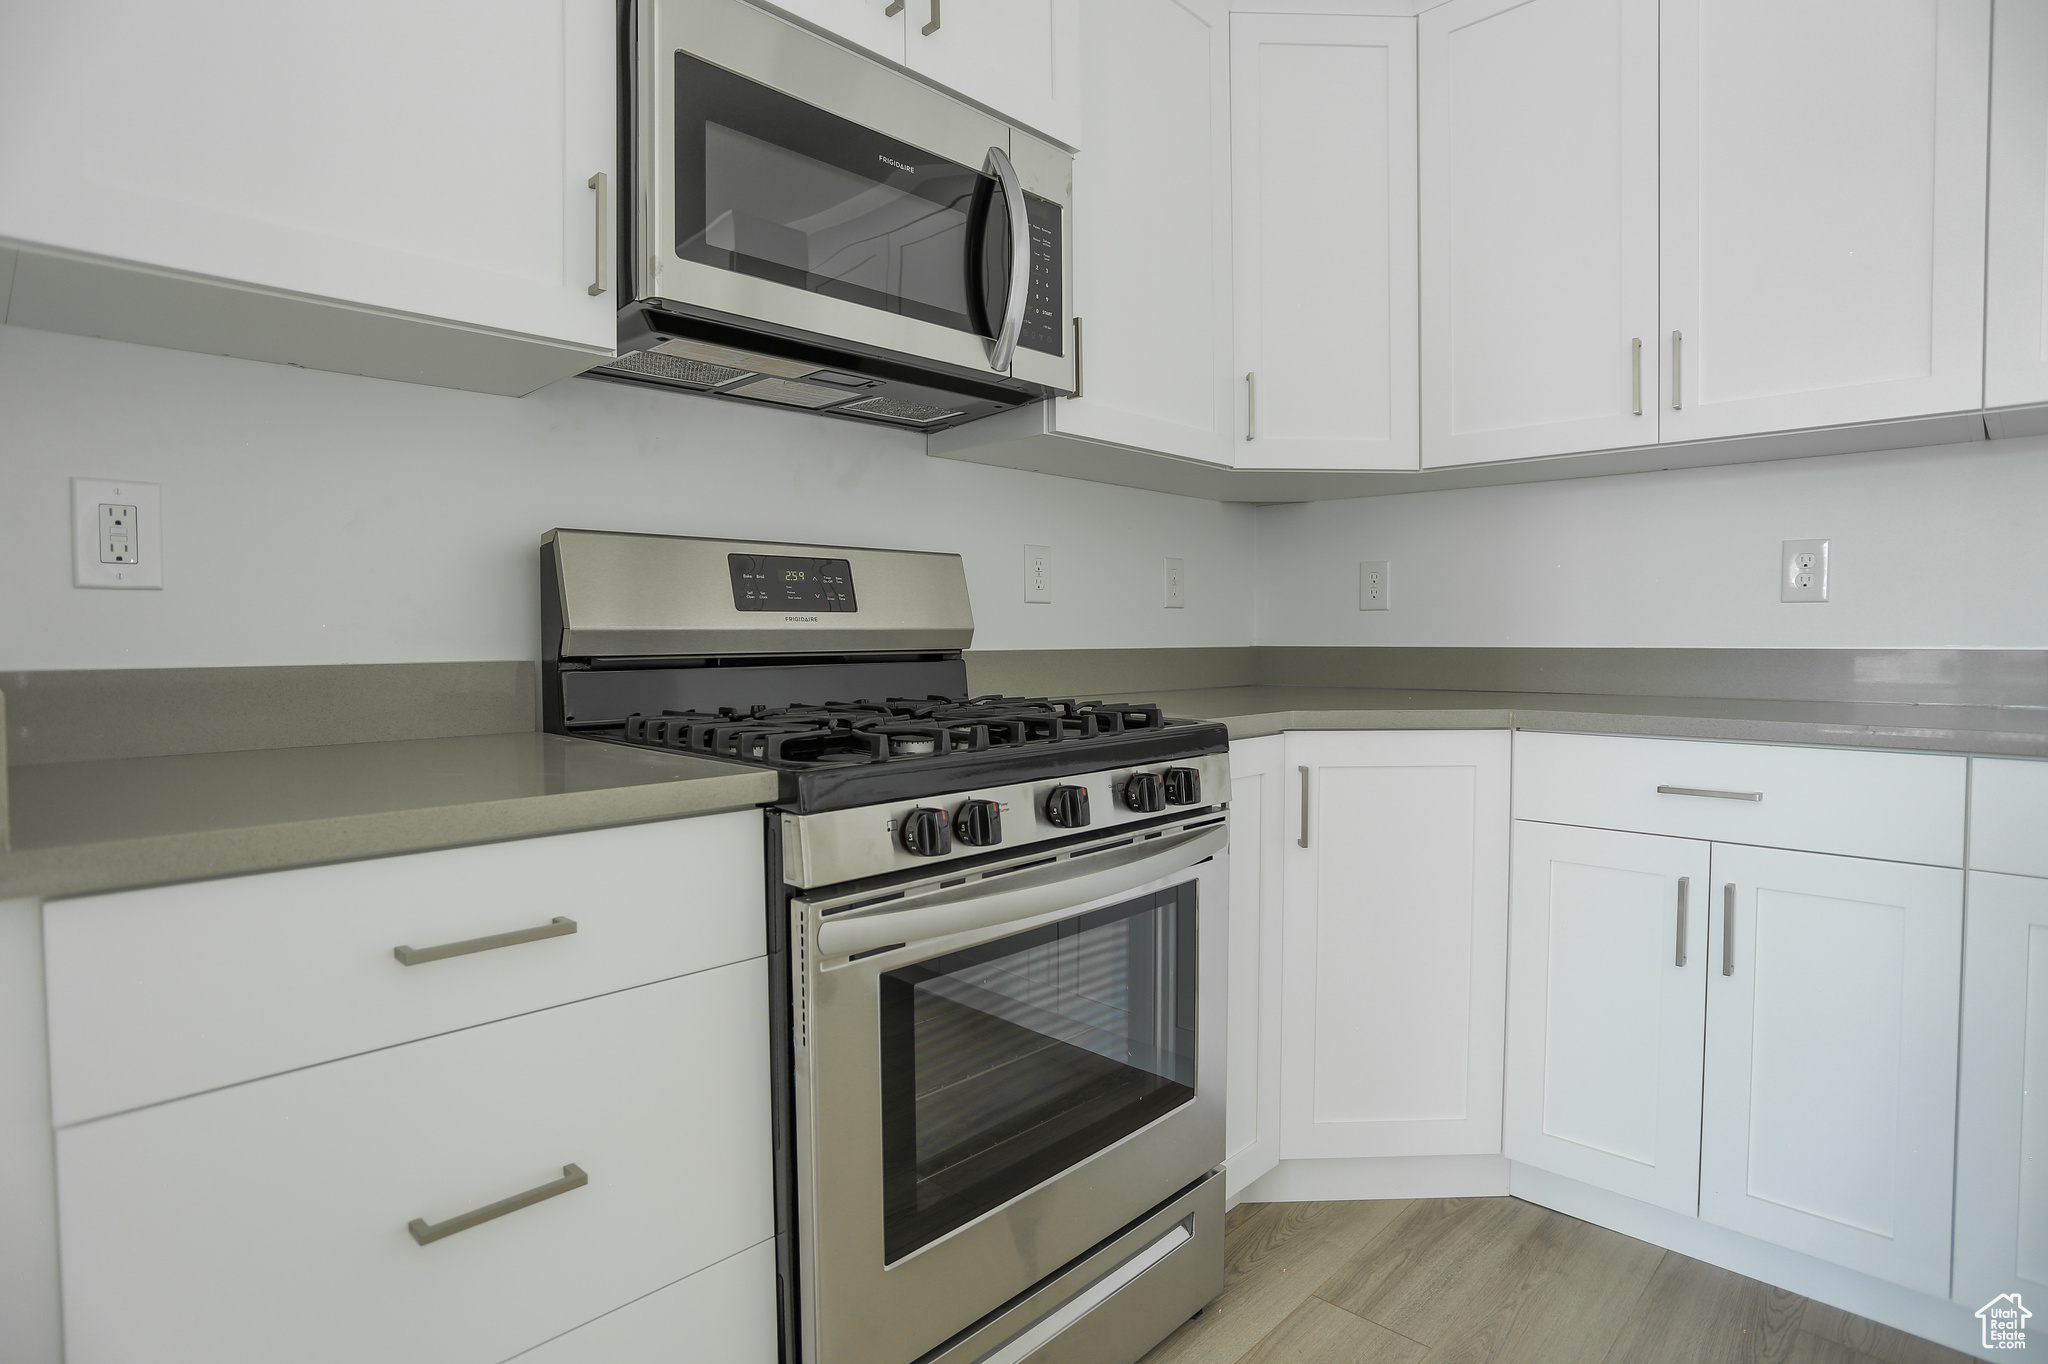 Kitchen featuring appliances with stainless steel finishes, light wood-type flooring, and white cabinets